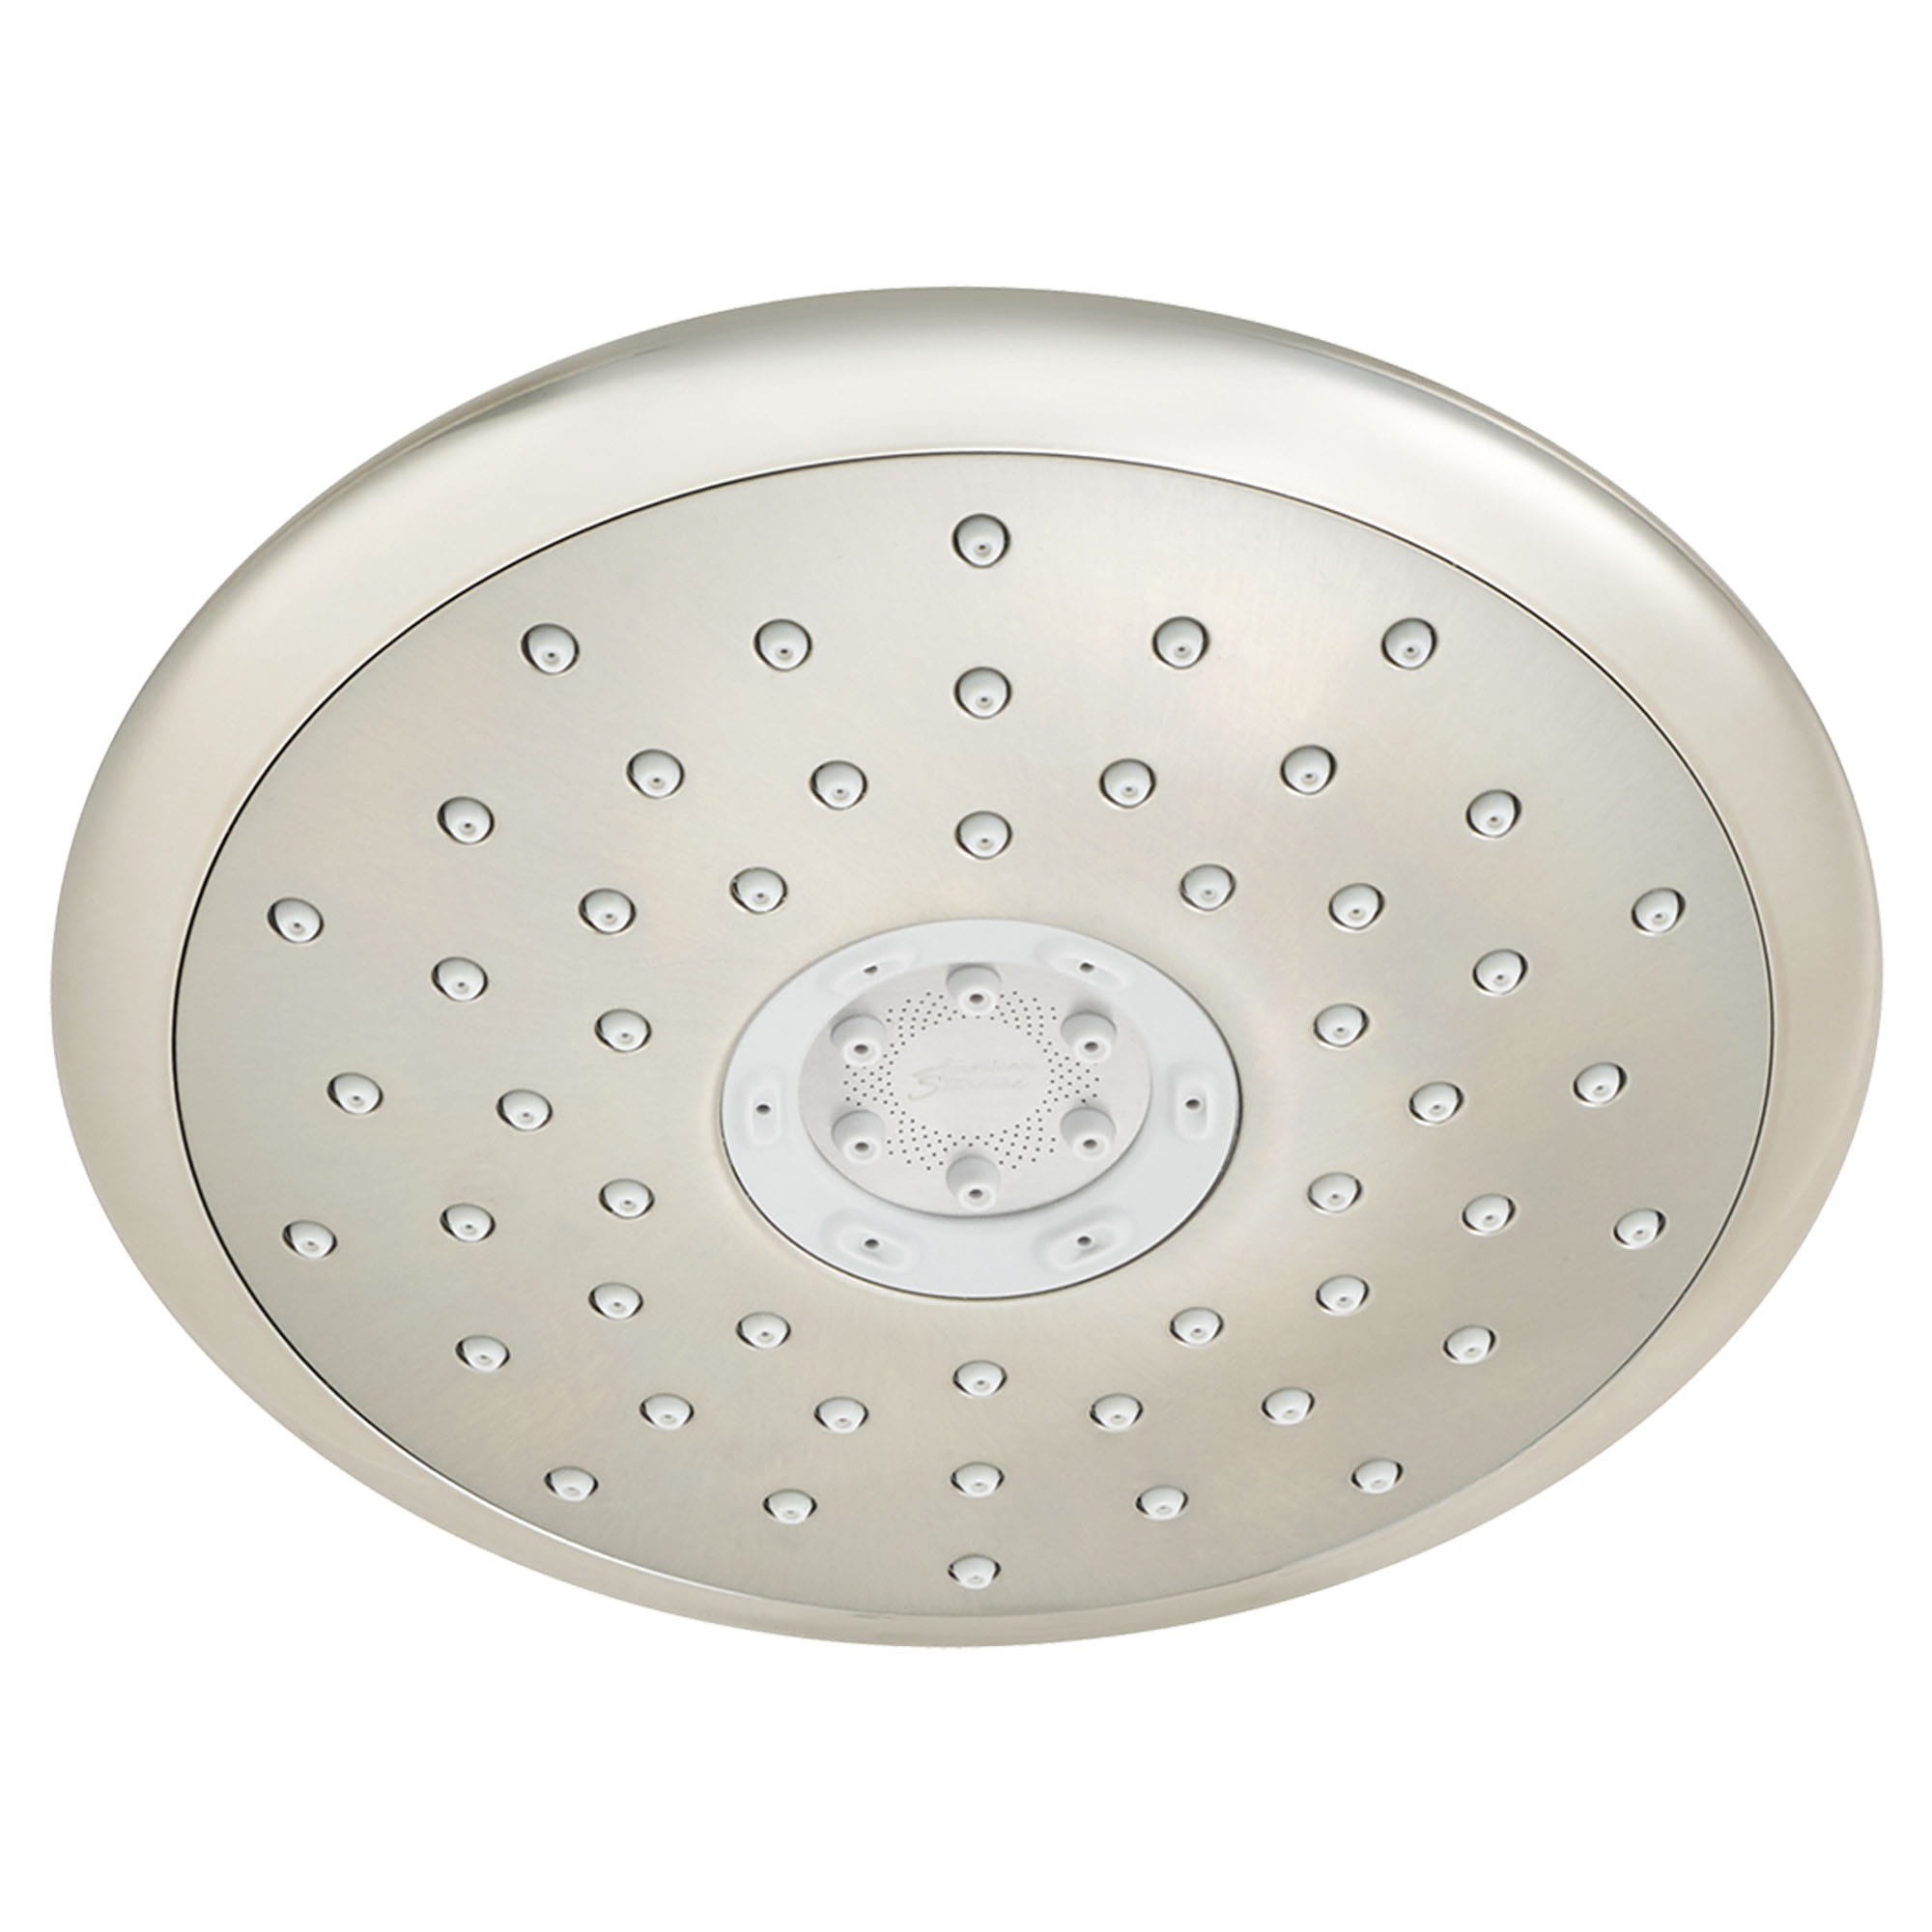 Spectra® Touch 7-Inch 1.8 gpm/6.8 L/min Water-Saving Fixed Showerhead